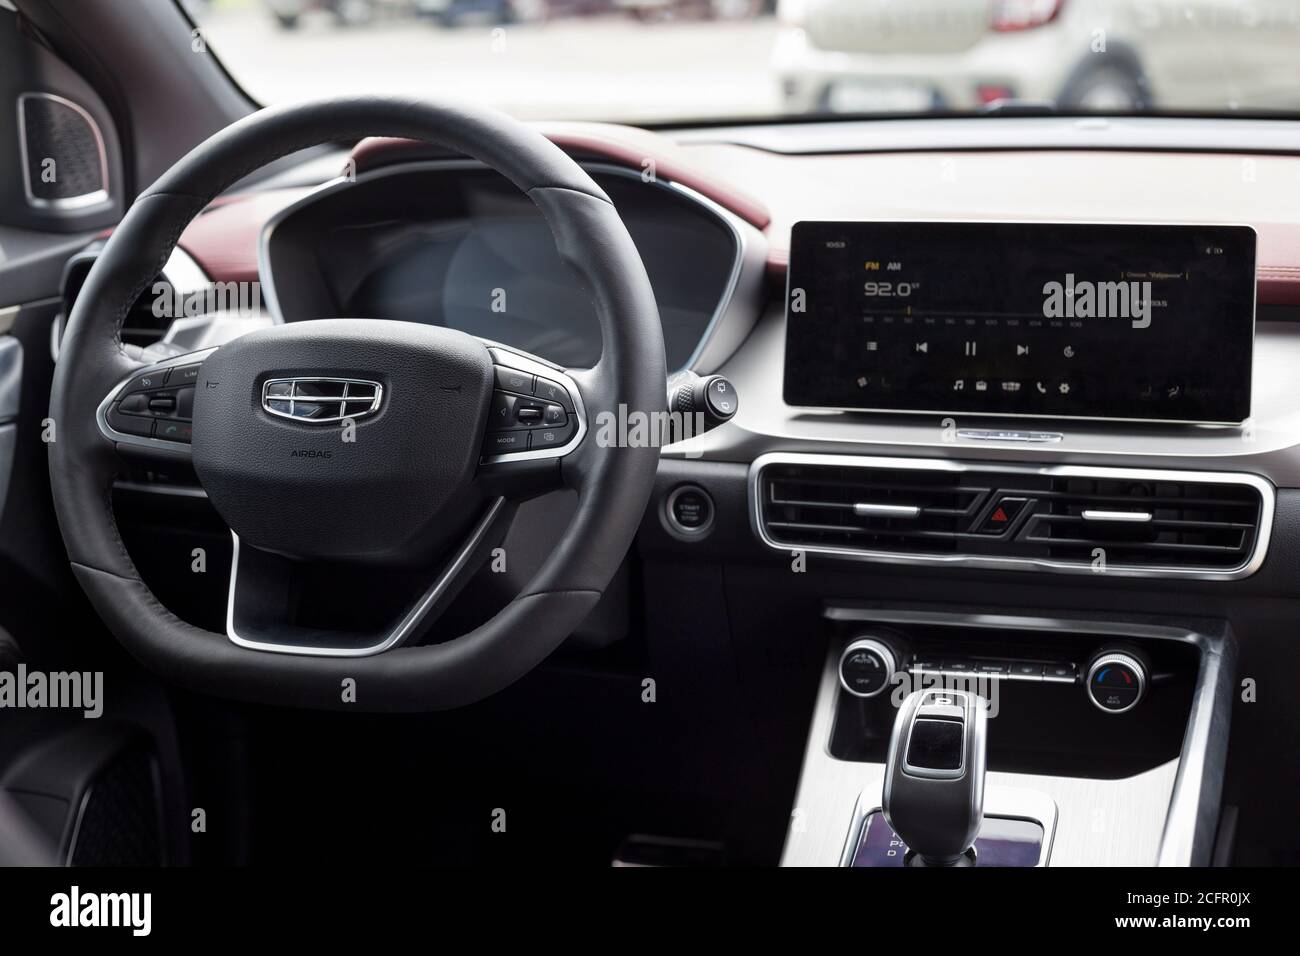 Russia, Izhevsk - August 14, 2020: Geely showroom. Steering wheel and interior of new modern CoolRay car. Car manufacturer from China. Stock Photo